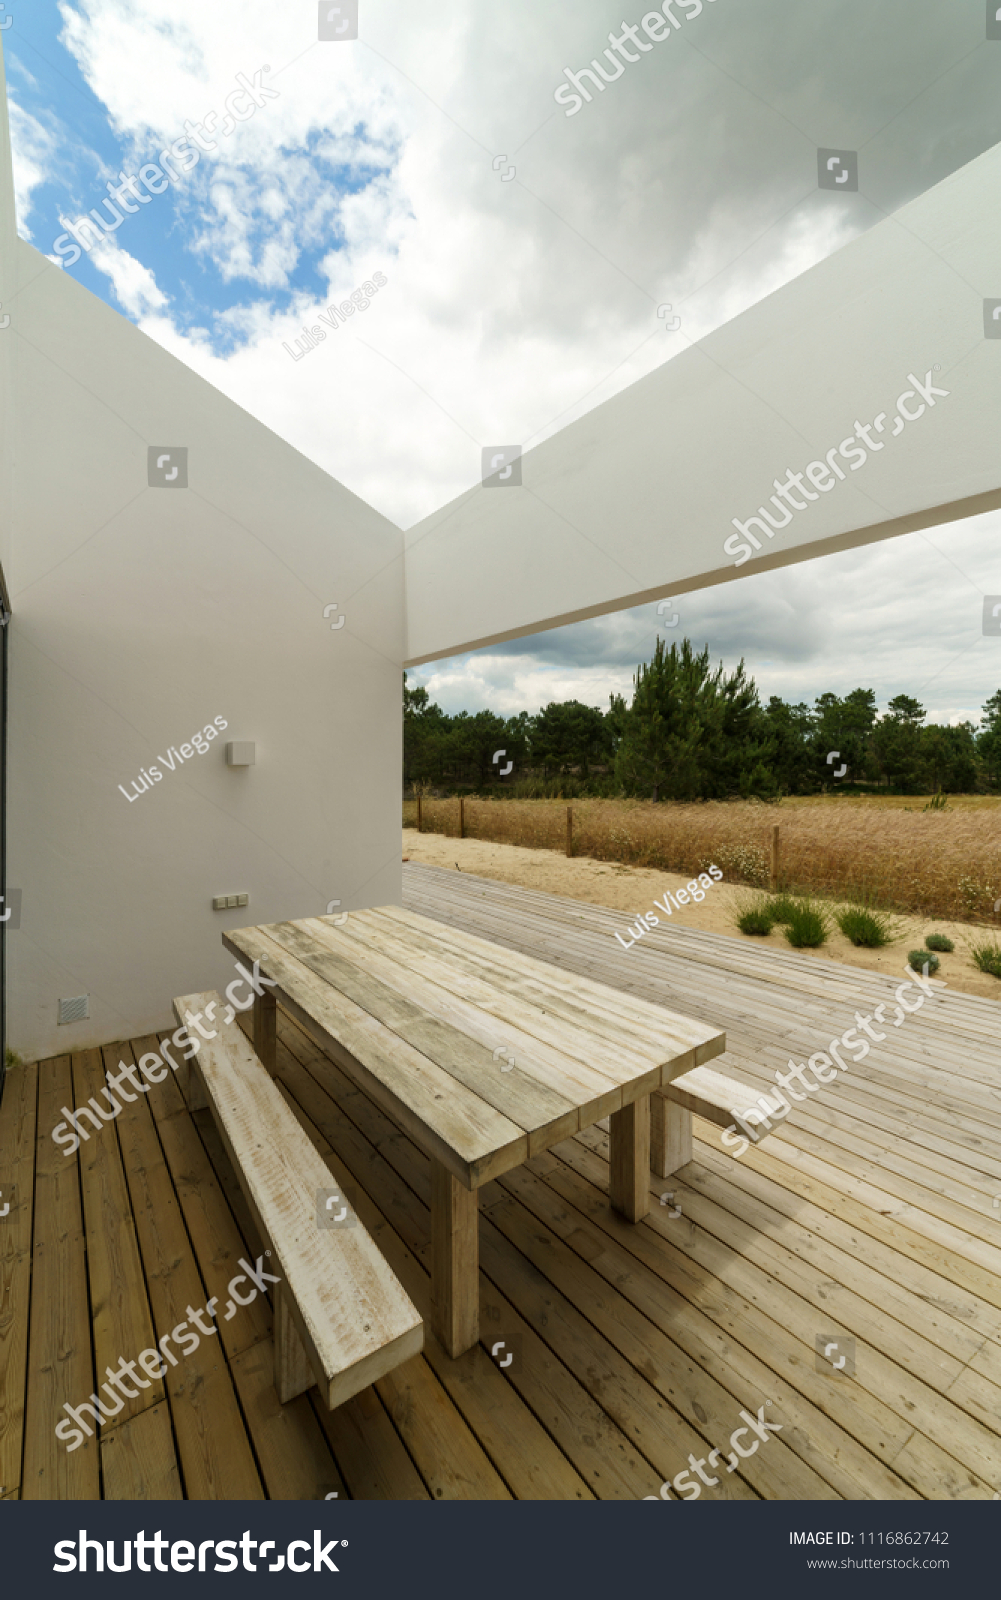 Stock Photo Modern House With Garden Swimming Pool And Wooden Deck 1116862742 